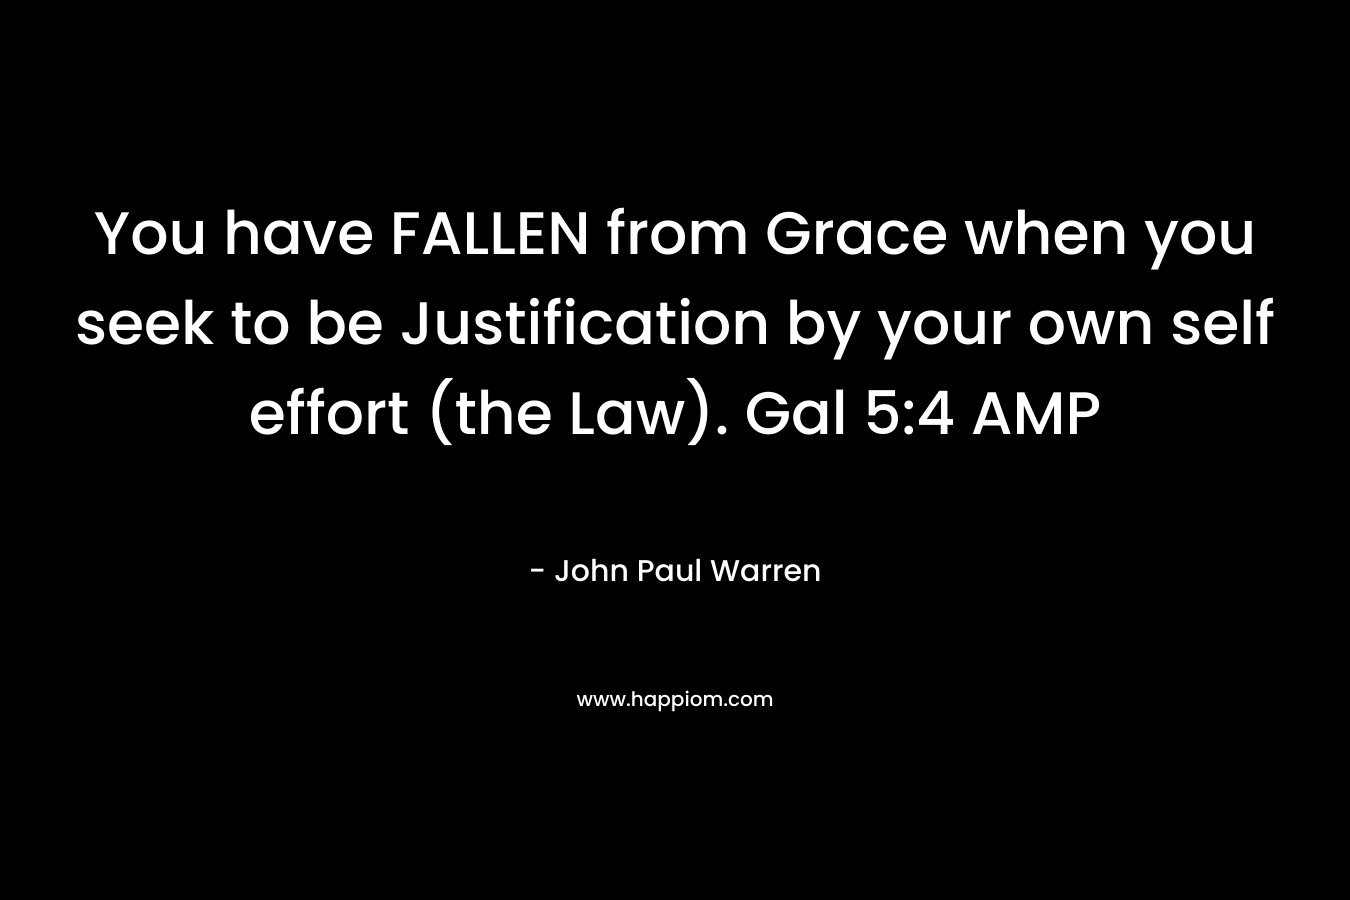 You have FALLEN from Grace when you seek to be Justification by your own self effort (the Law). Gal 5:4 AMP – John Paul Warren